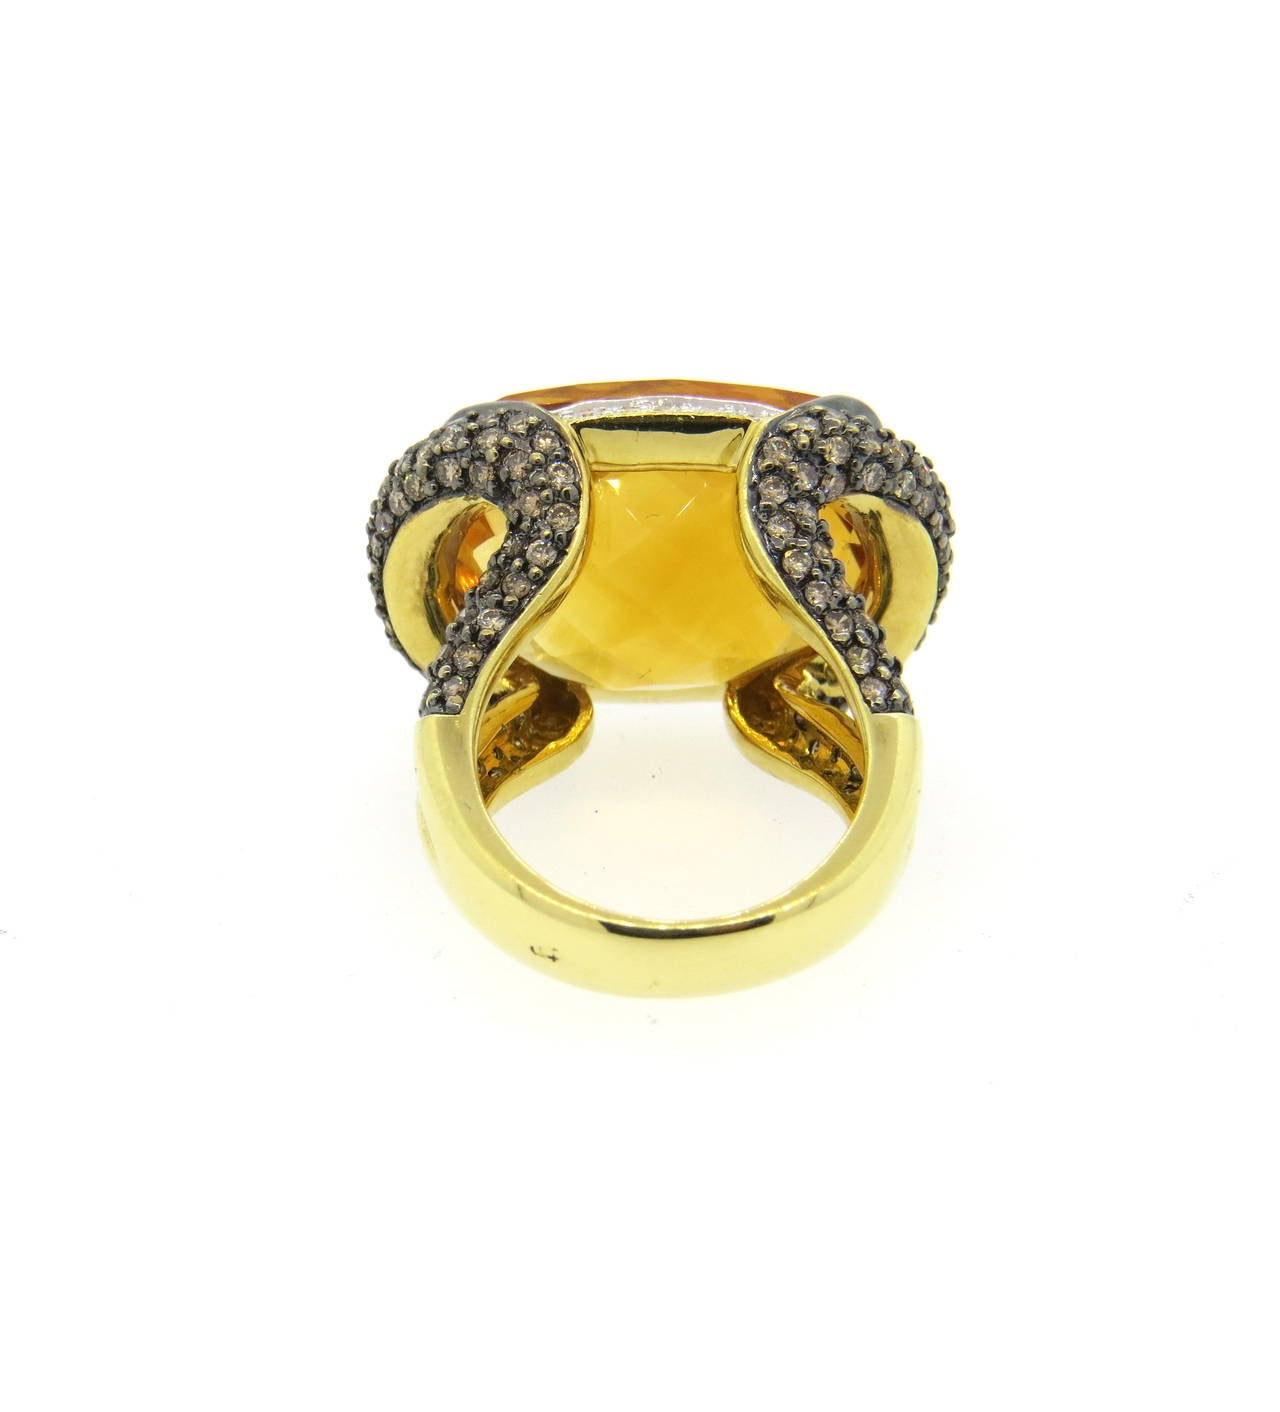 Beautiful 18K gold cocktail ring featuring a faceted citrine center decorated with approximately 1.80ctw of fancy diamonds and 0.15ctw of white diamonds. Ring size 5.25, ring top measures 25mm x 17.8mm. Marked 750 18K, weighs 17.7 grams.